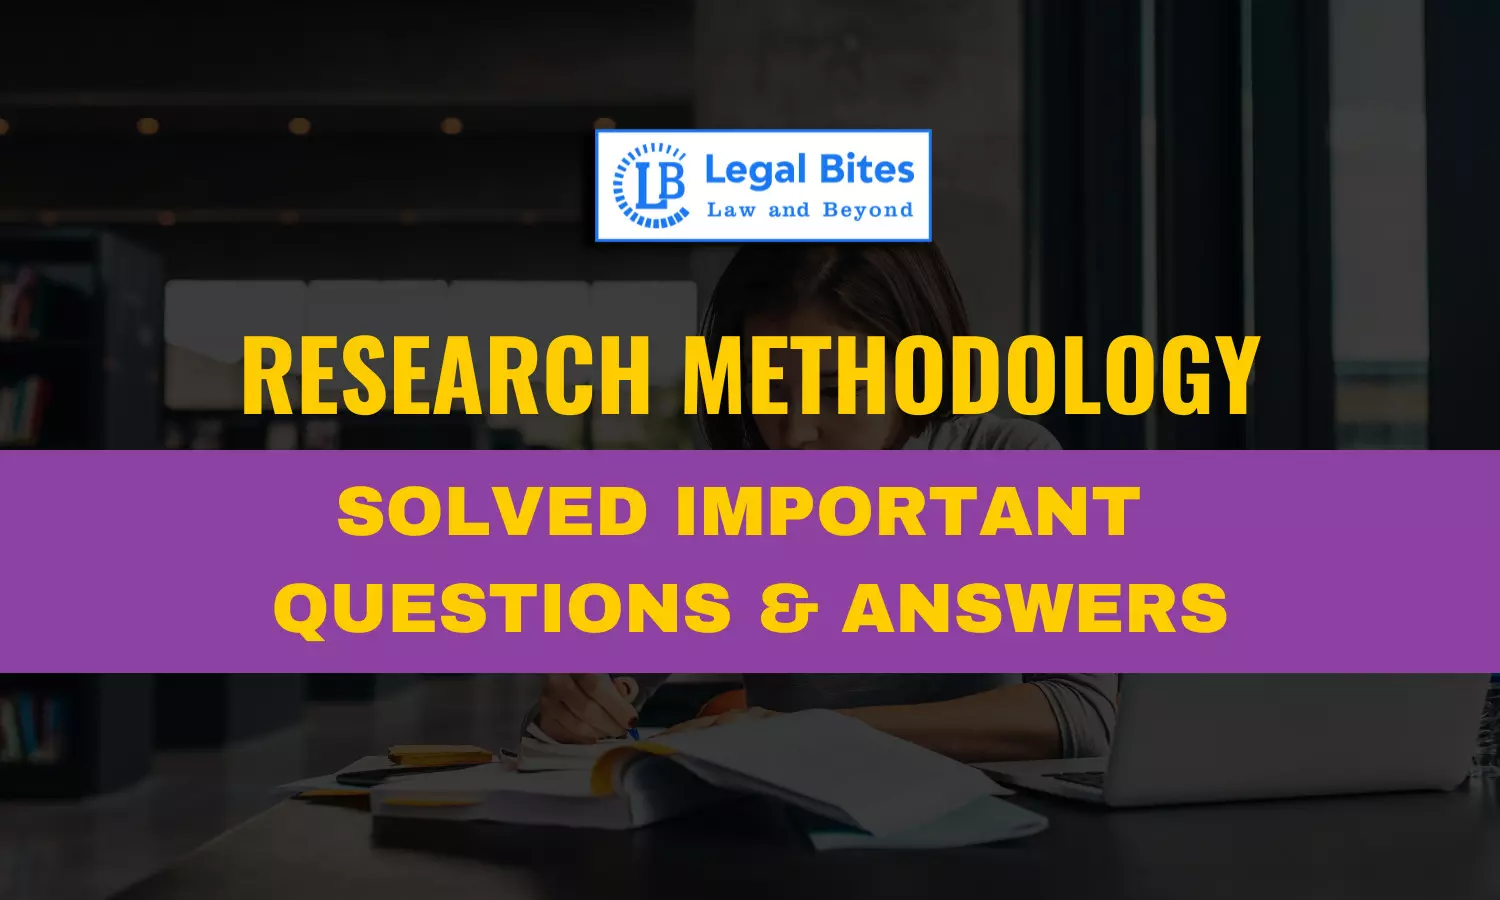 What do you understand by the expression Cluster Analysis? Explain the difference between hierarchical and non-hierarchical and their pros and cons in legal research.